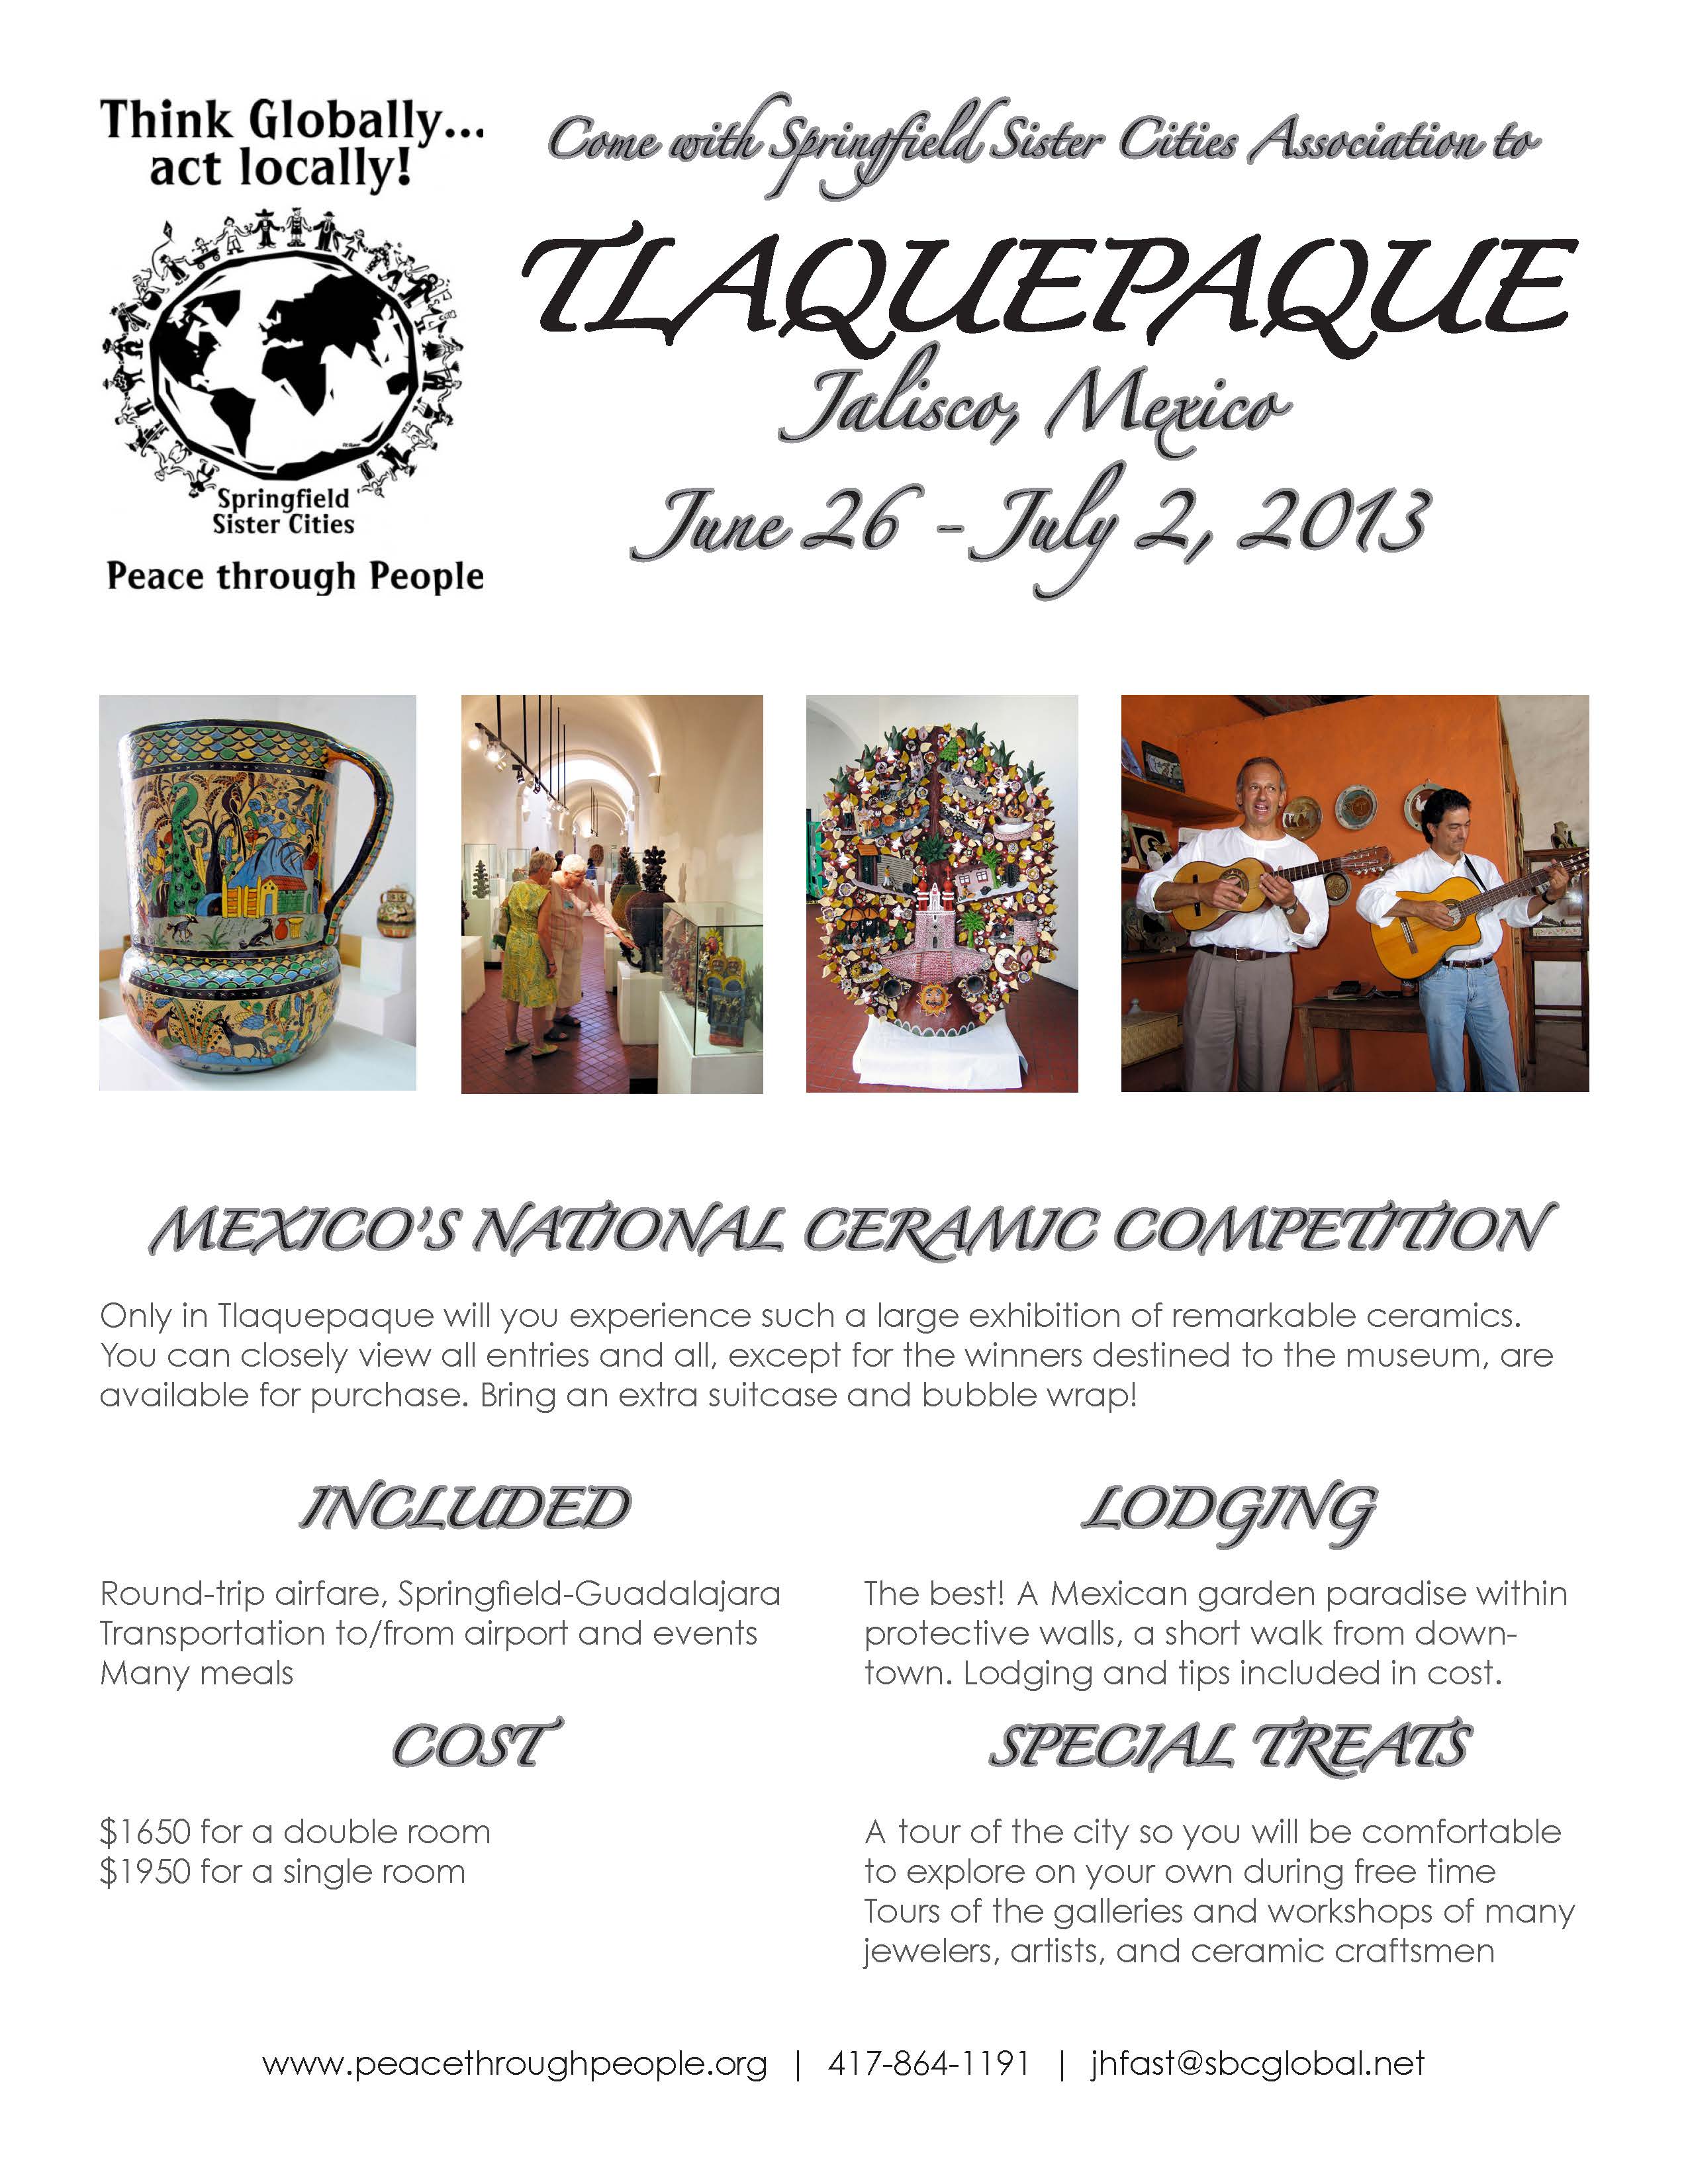 mexico's national ceramic competition flyer